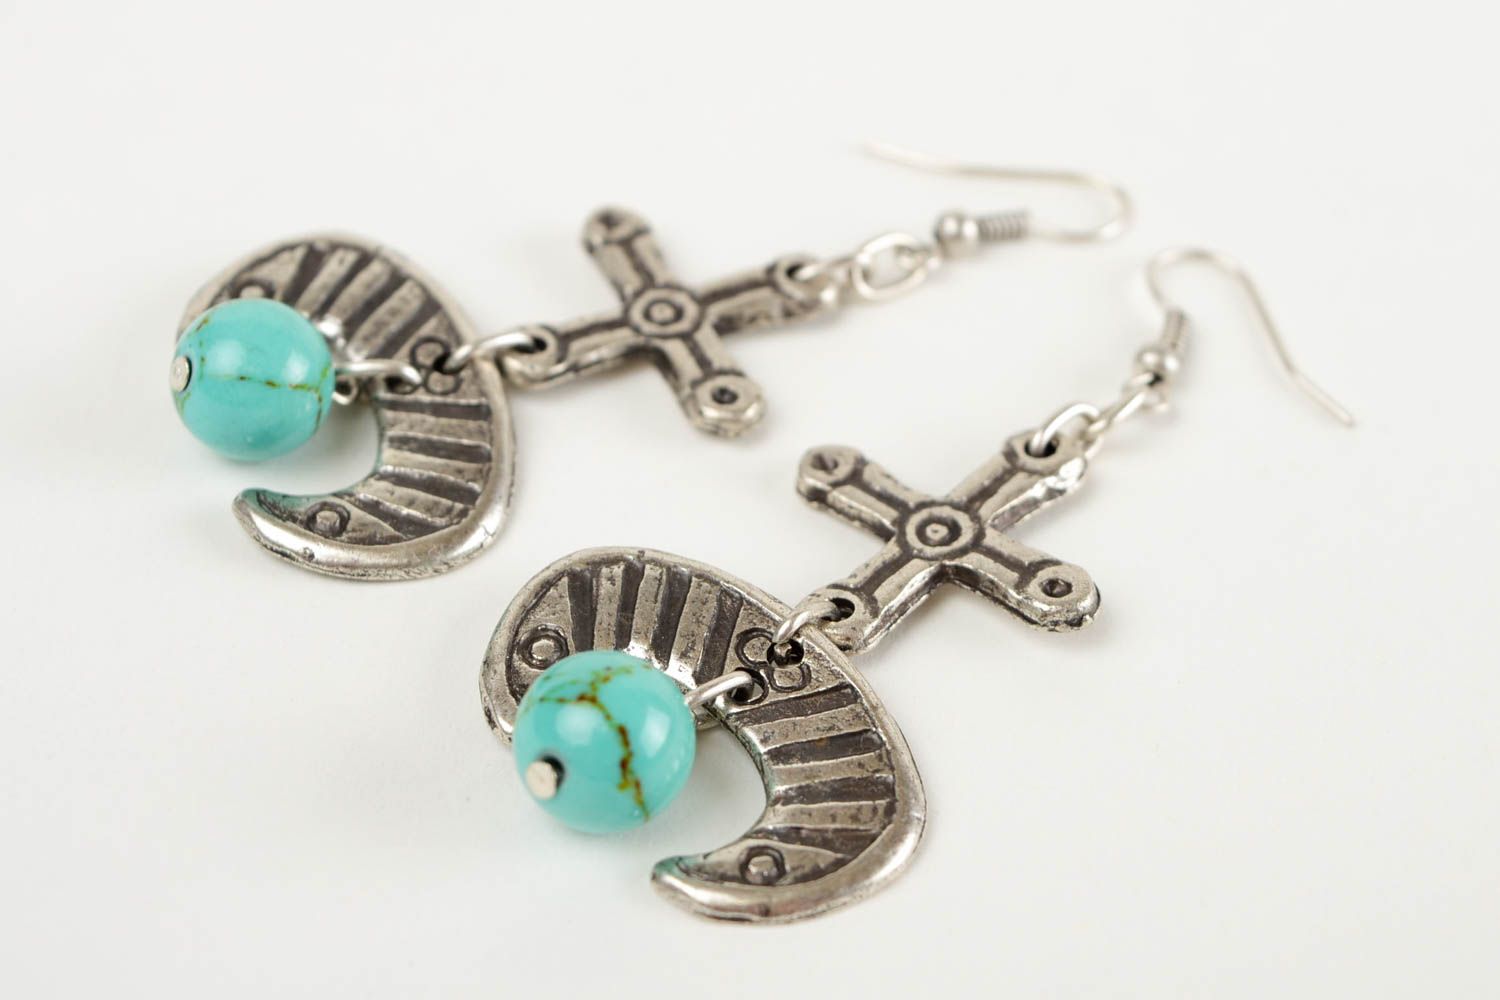 Long handcrafted earrings designer turquoise metal accessories women gift idea photo 4